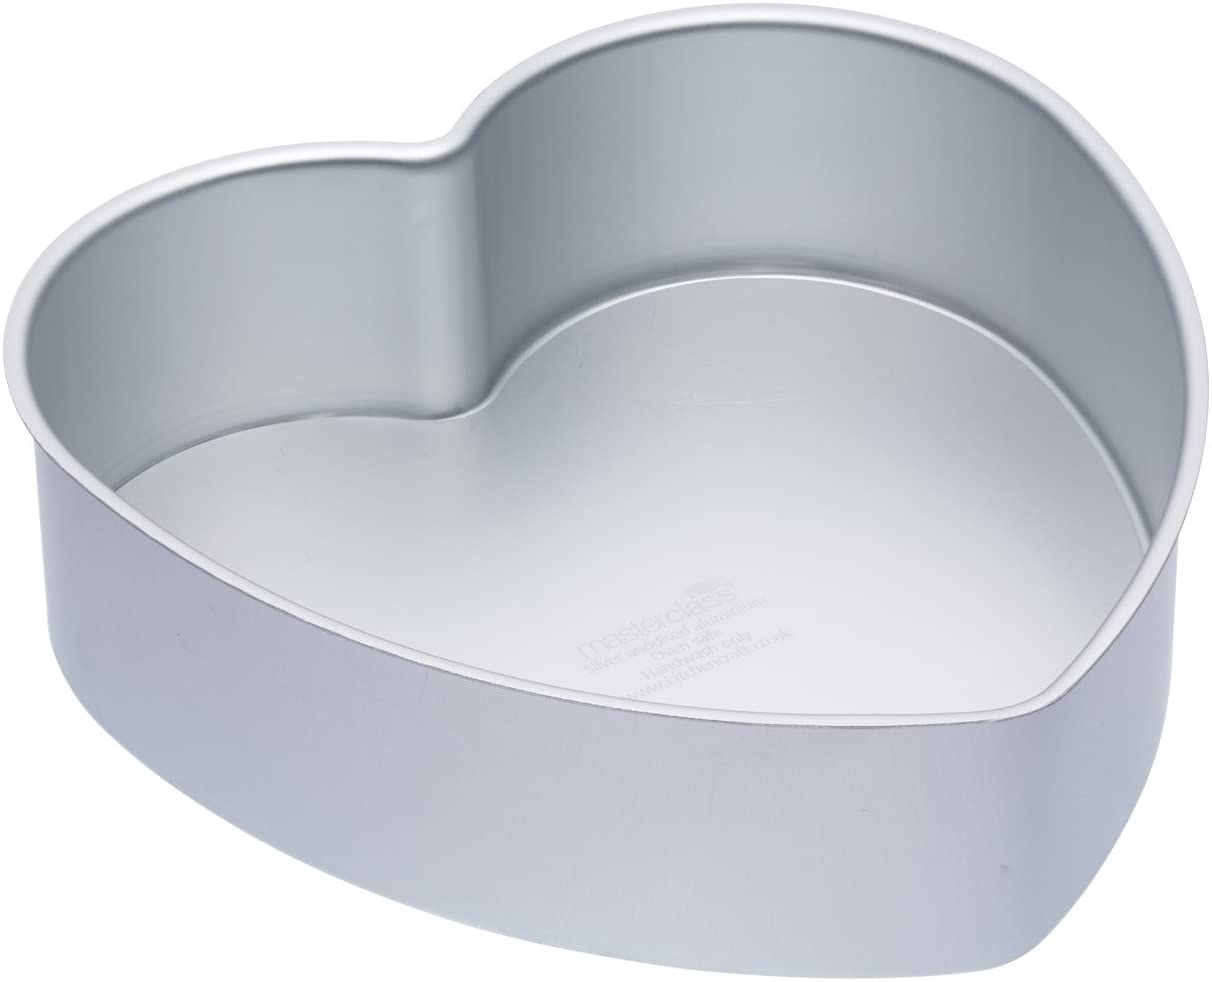 Kitchen Craft MCSA18 Heart-Shaped Cake Tin with Loose Base Sauce, Silver, 25 x 25 x 7.8 cm